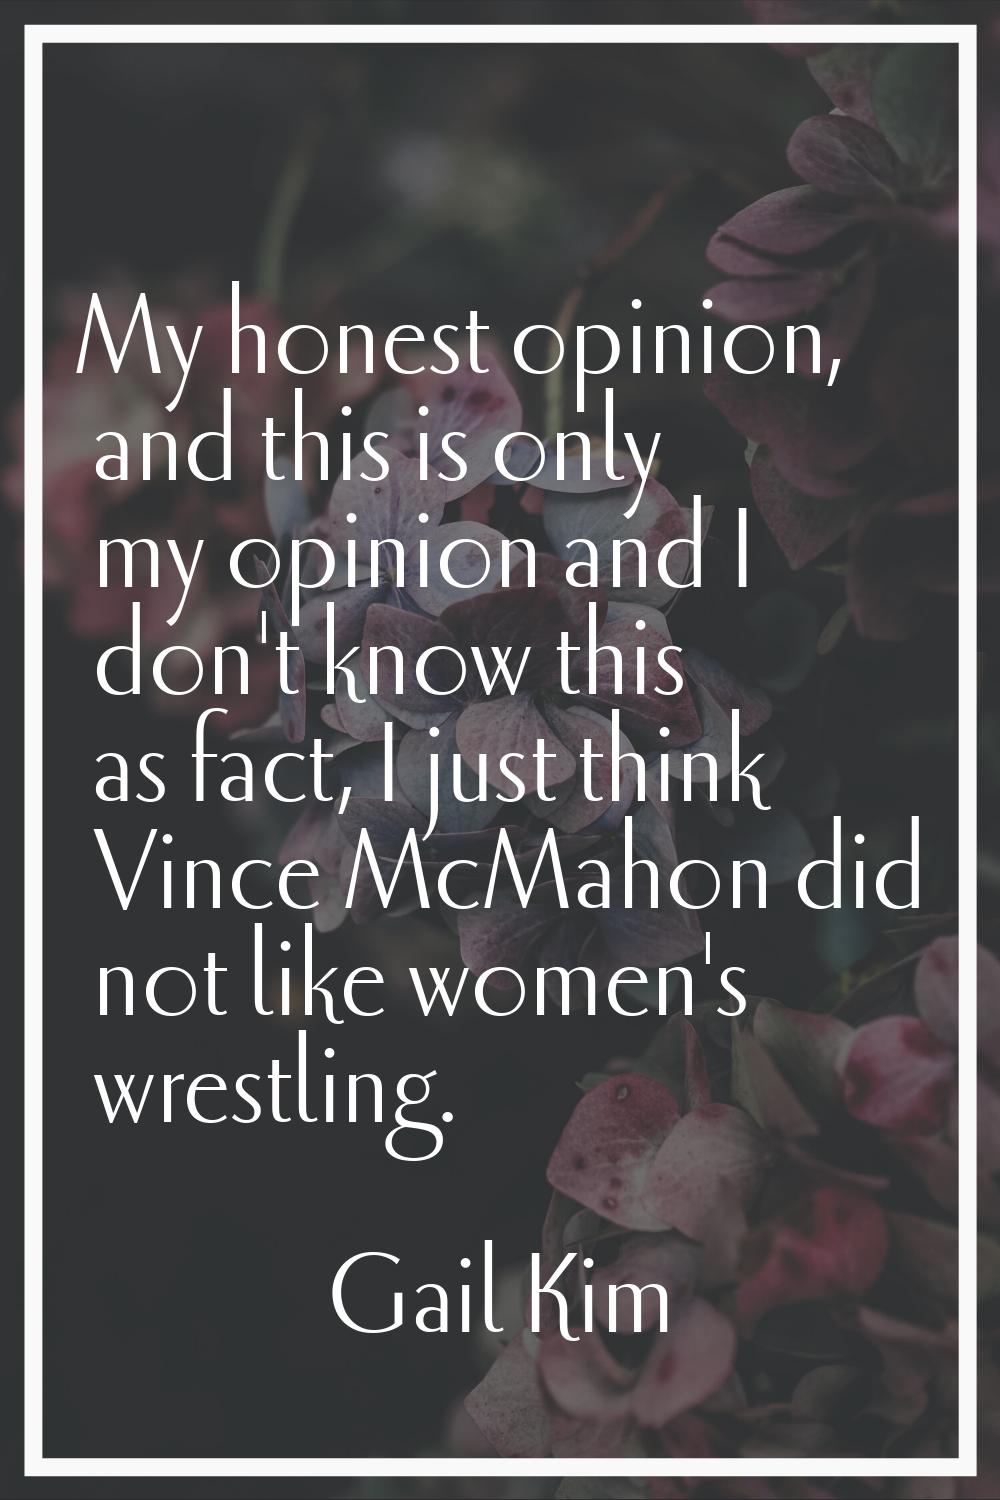 My honest opinion, and this is only my opinion and I don't know this as fact, I just think Vince Mc